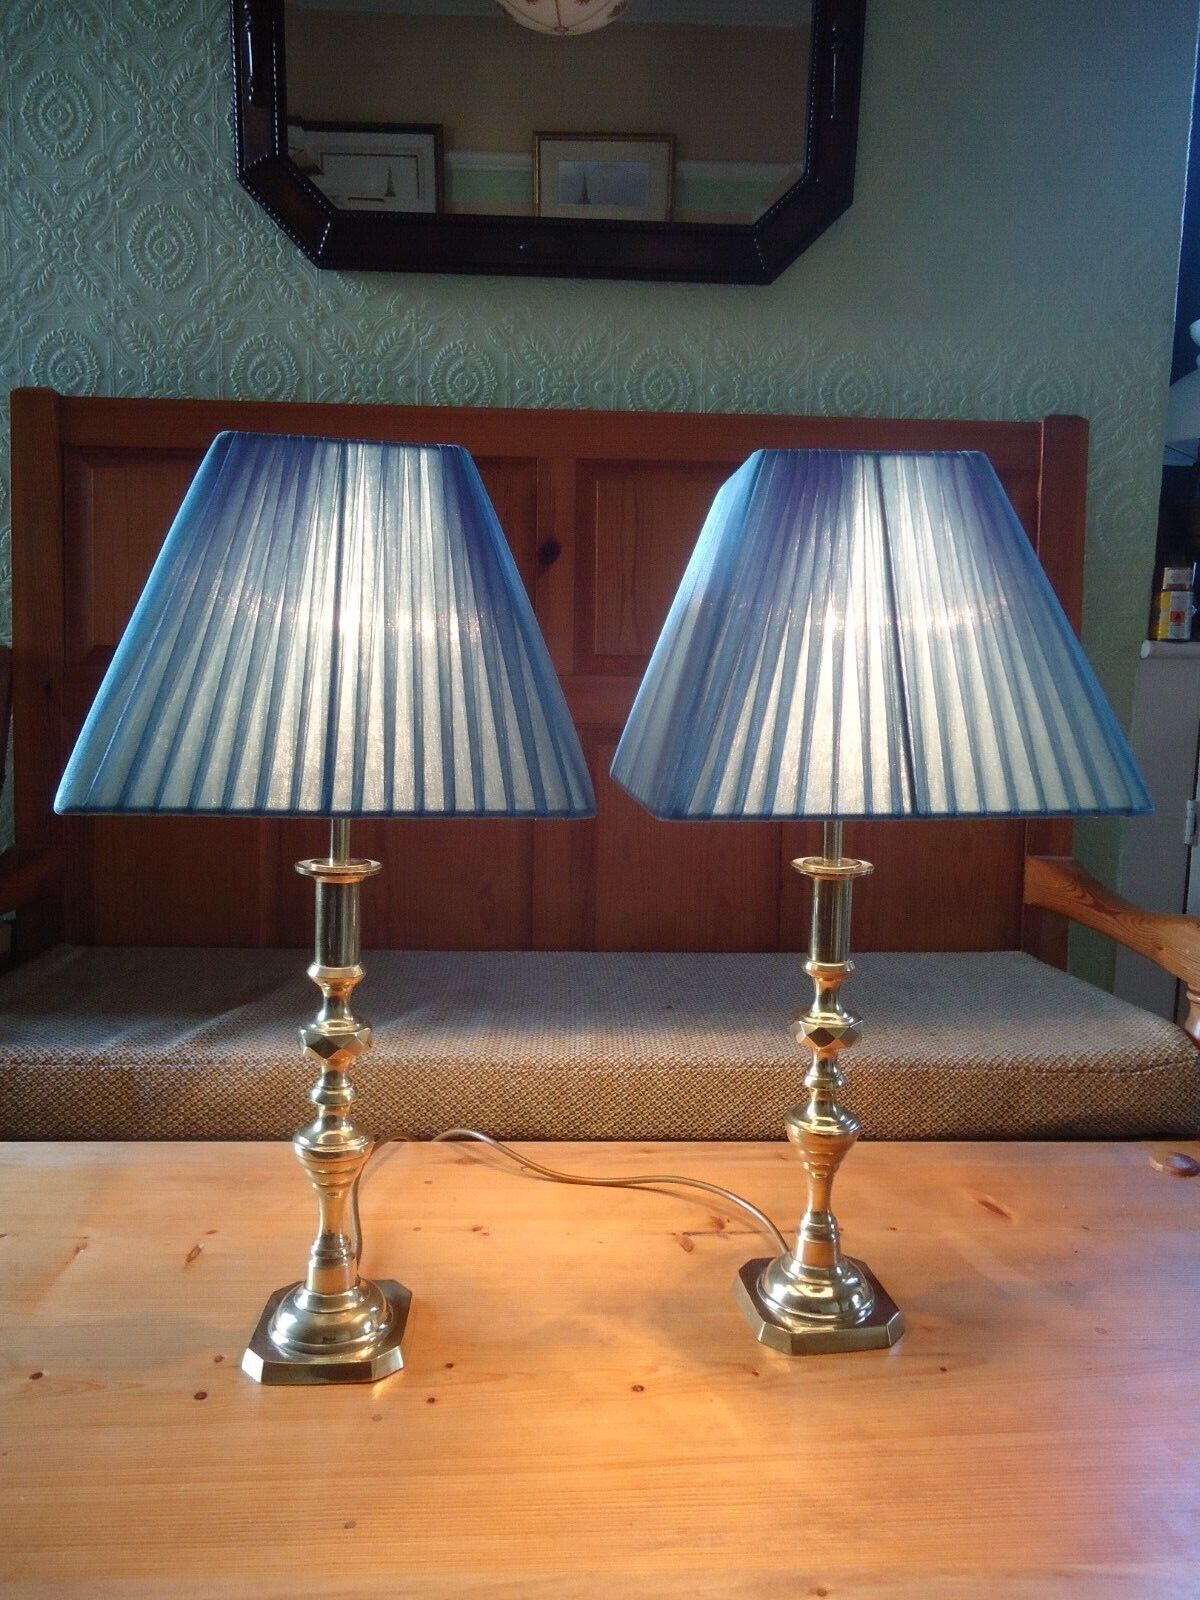 Pair of Vintage Antique Brass Candlestick Table Lamps with Shades